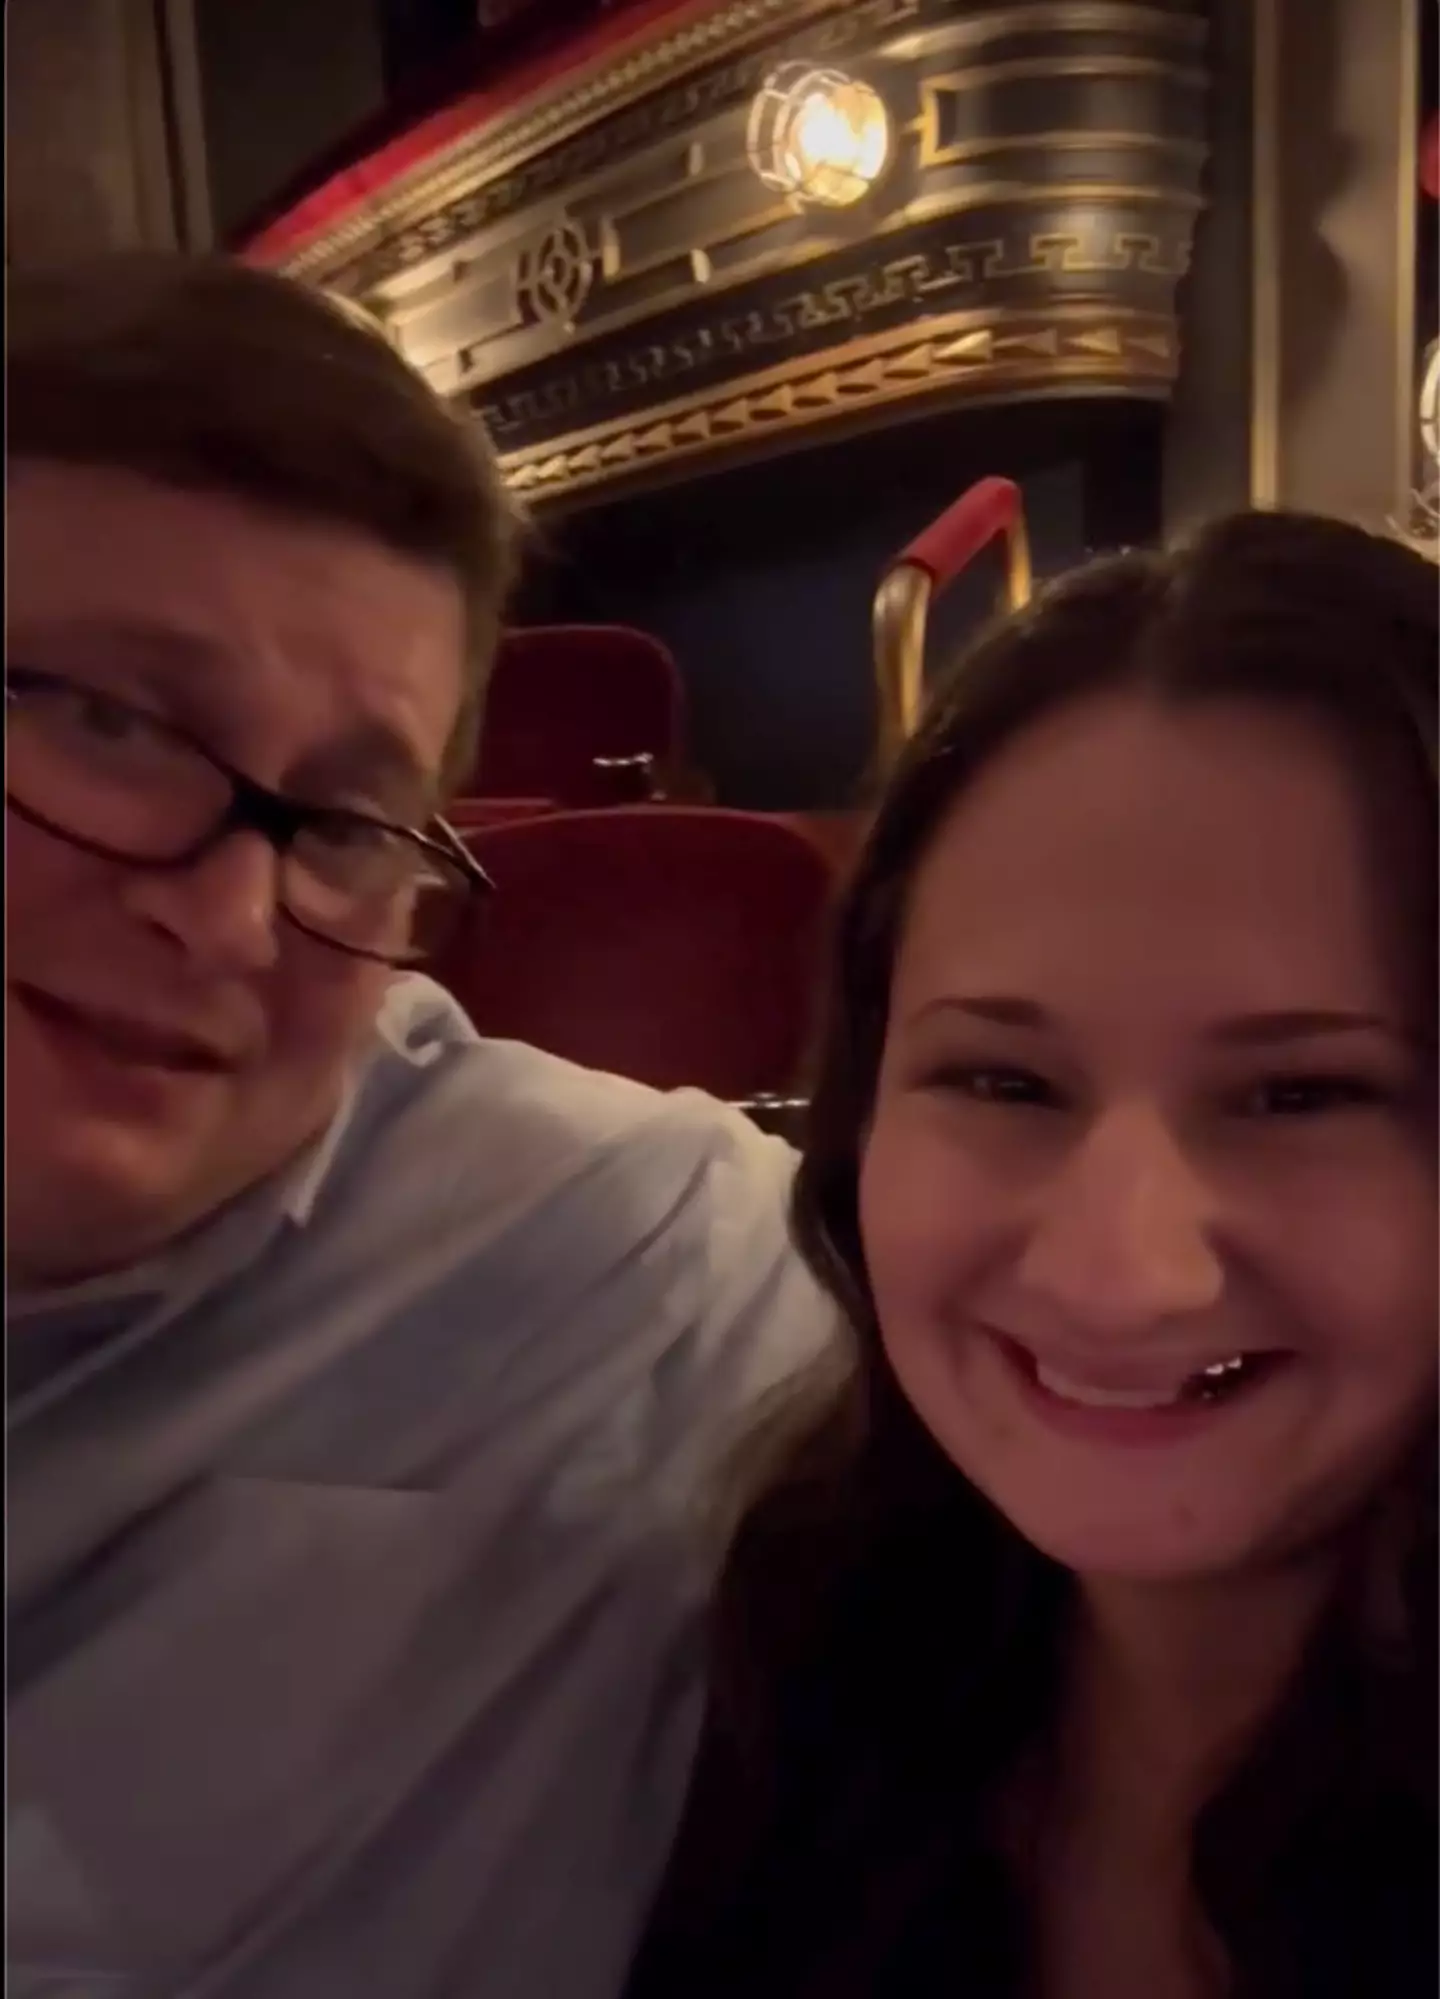 Gypsy Rose Blanchard went to the theatre with her husband Ryan Scott Anderson.